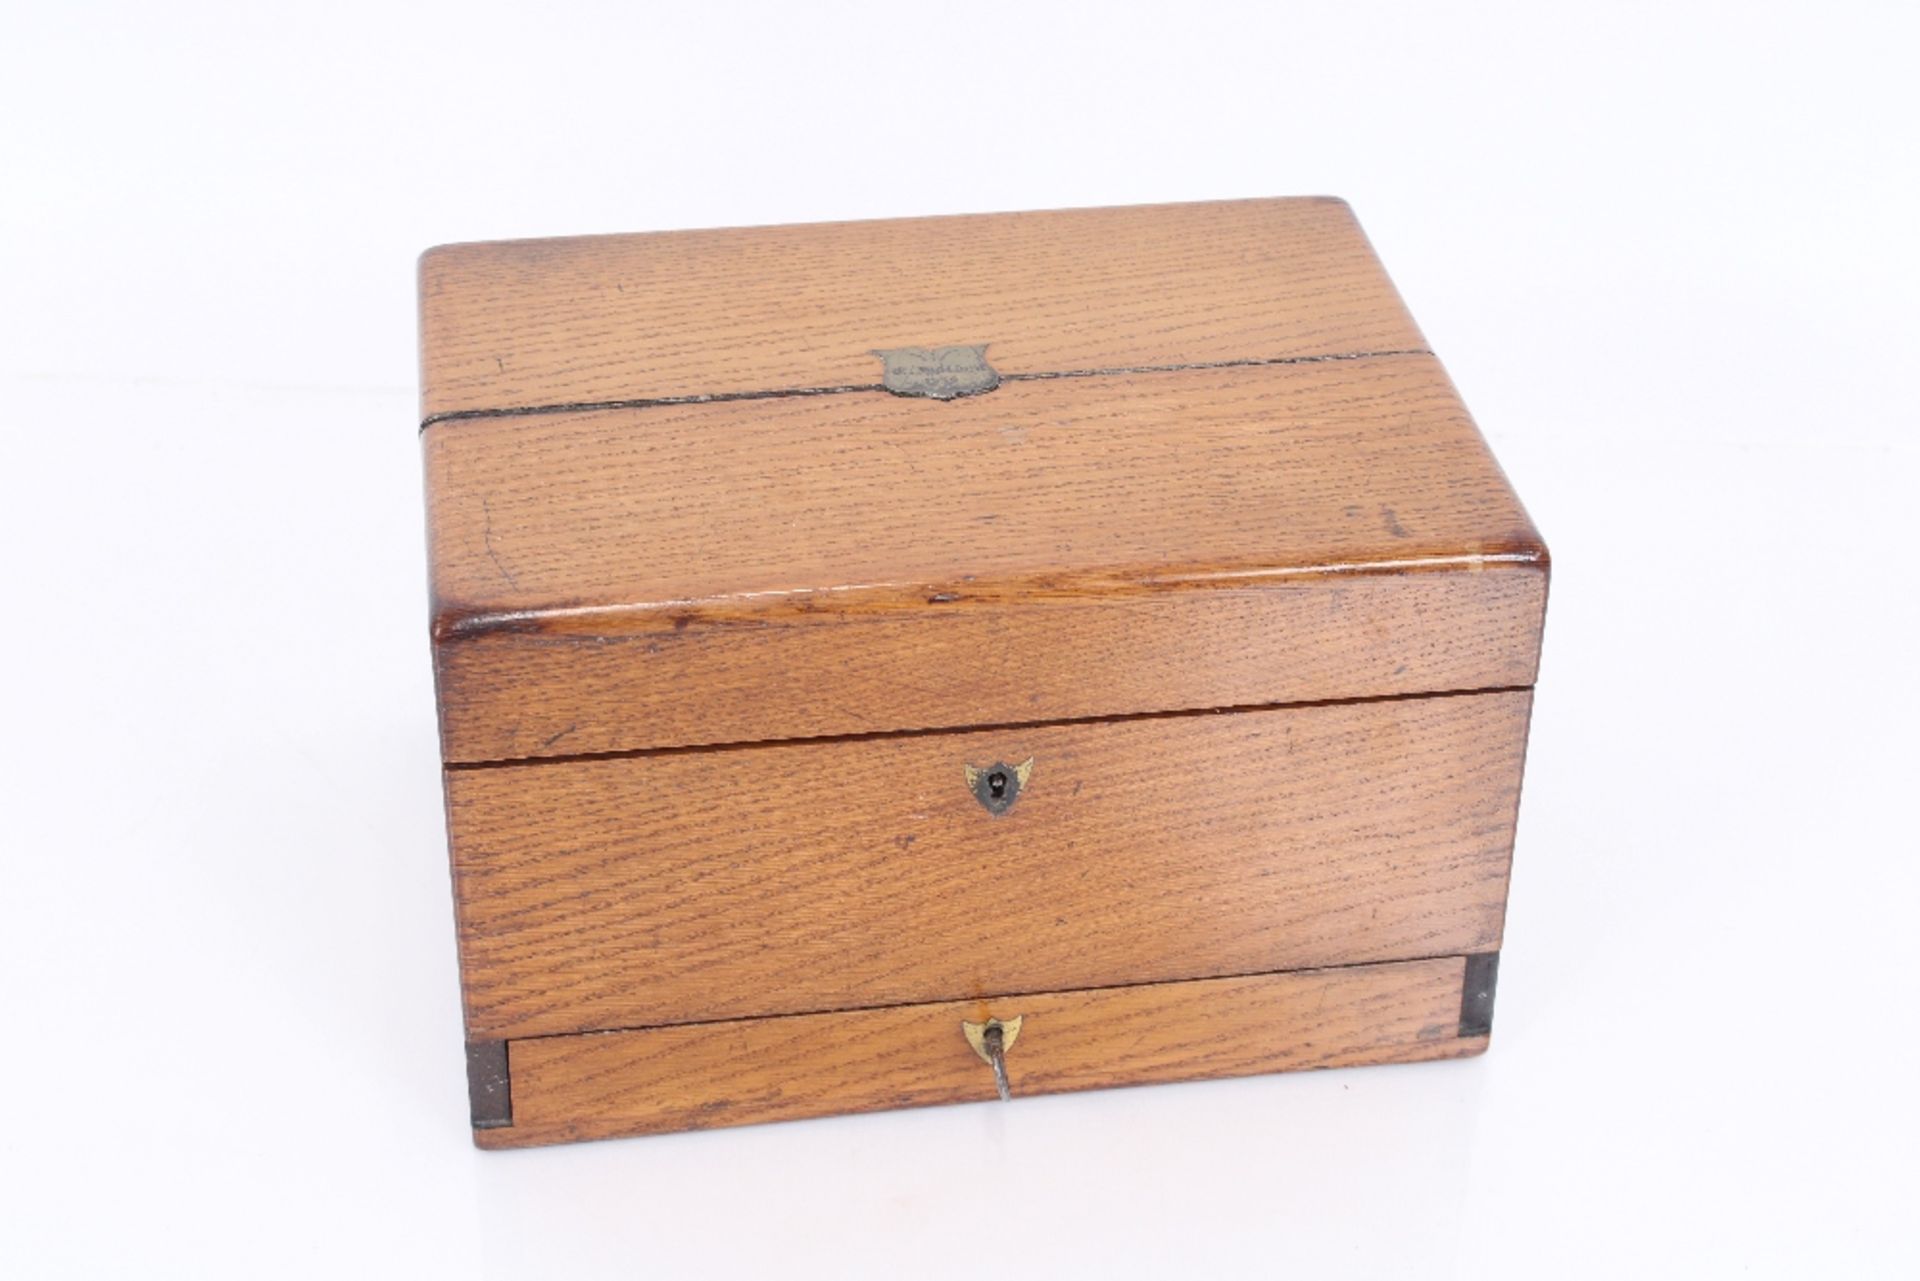 A 19th century golden oak, cased vanity box containing various bottles and tidy jars with foliate - Image 2 of 3